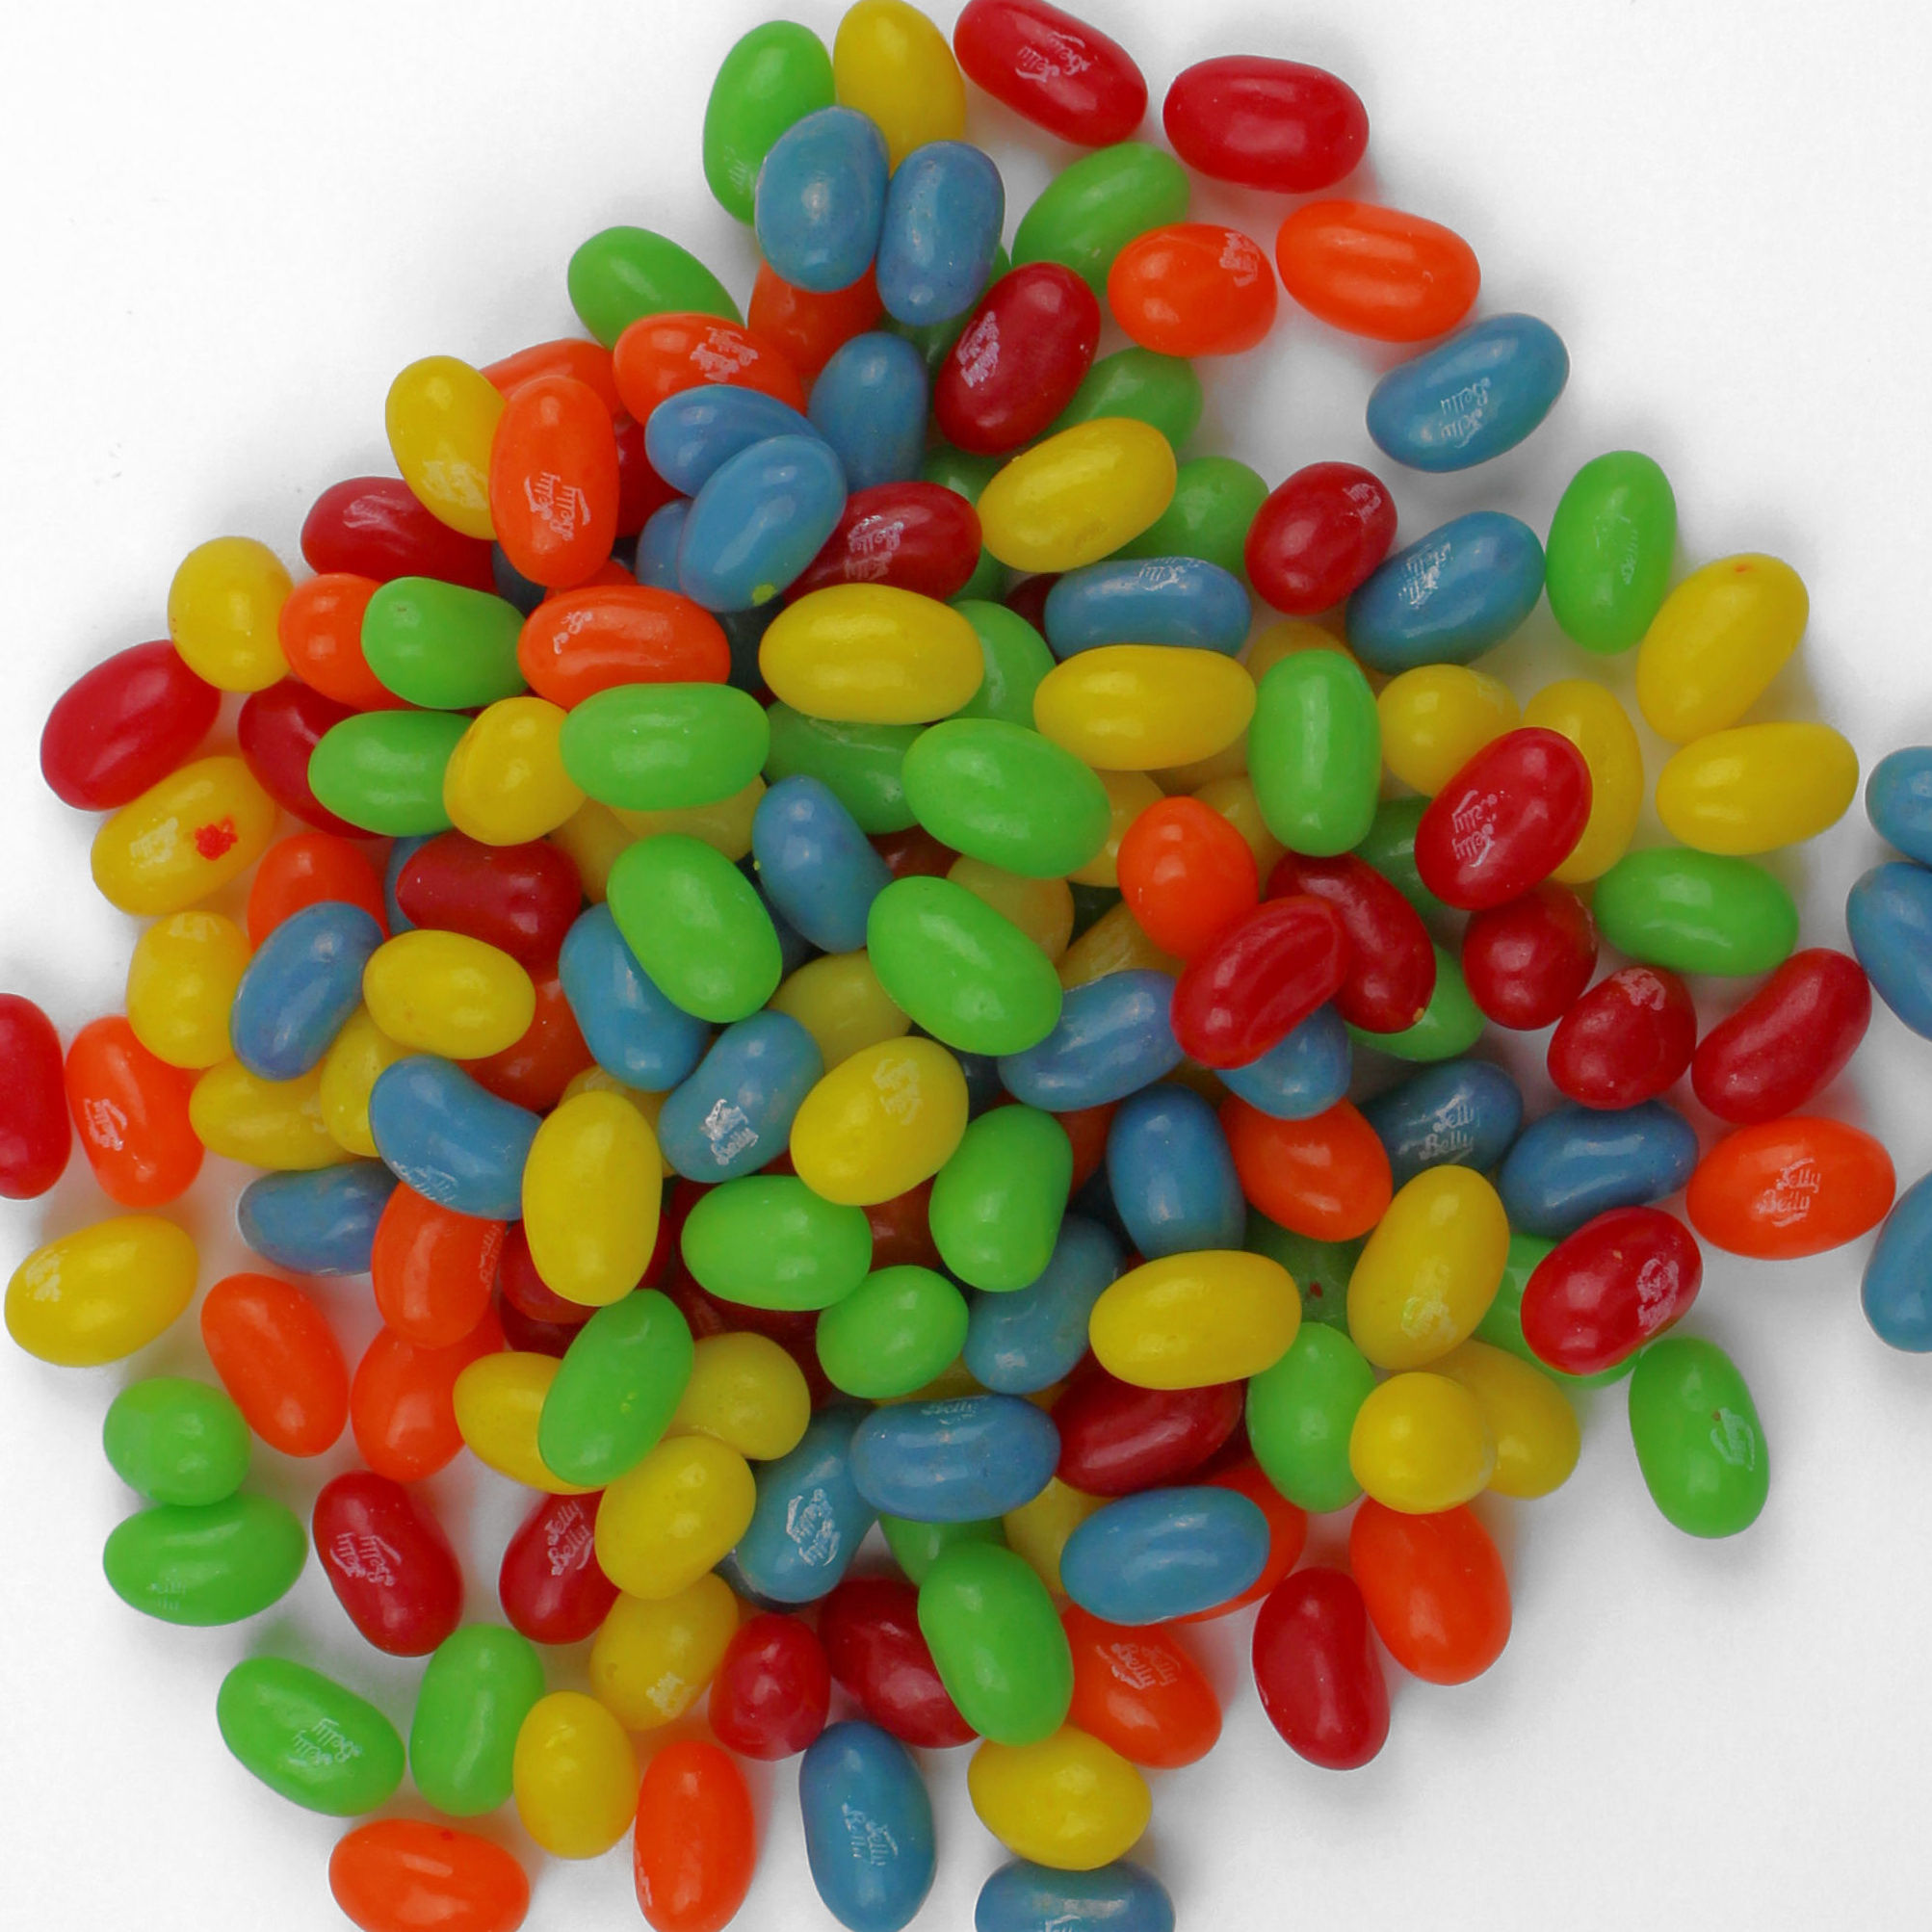 Jelly Belly 5 Flavor Sour Assortment, 1 lb. - Wockenfuss Candies